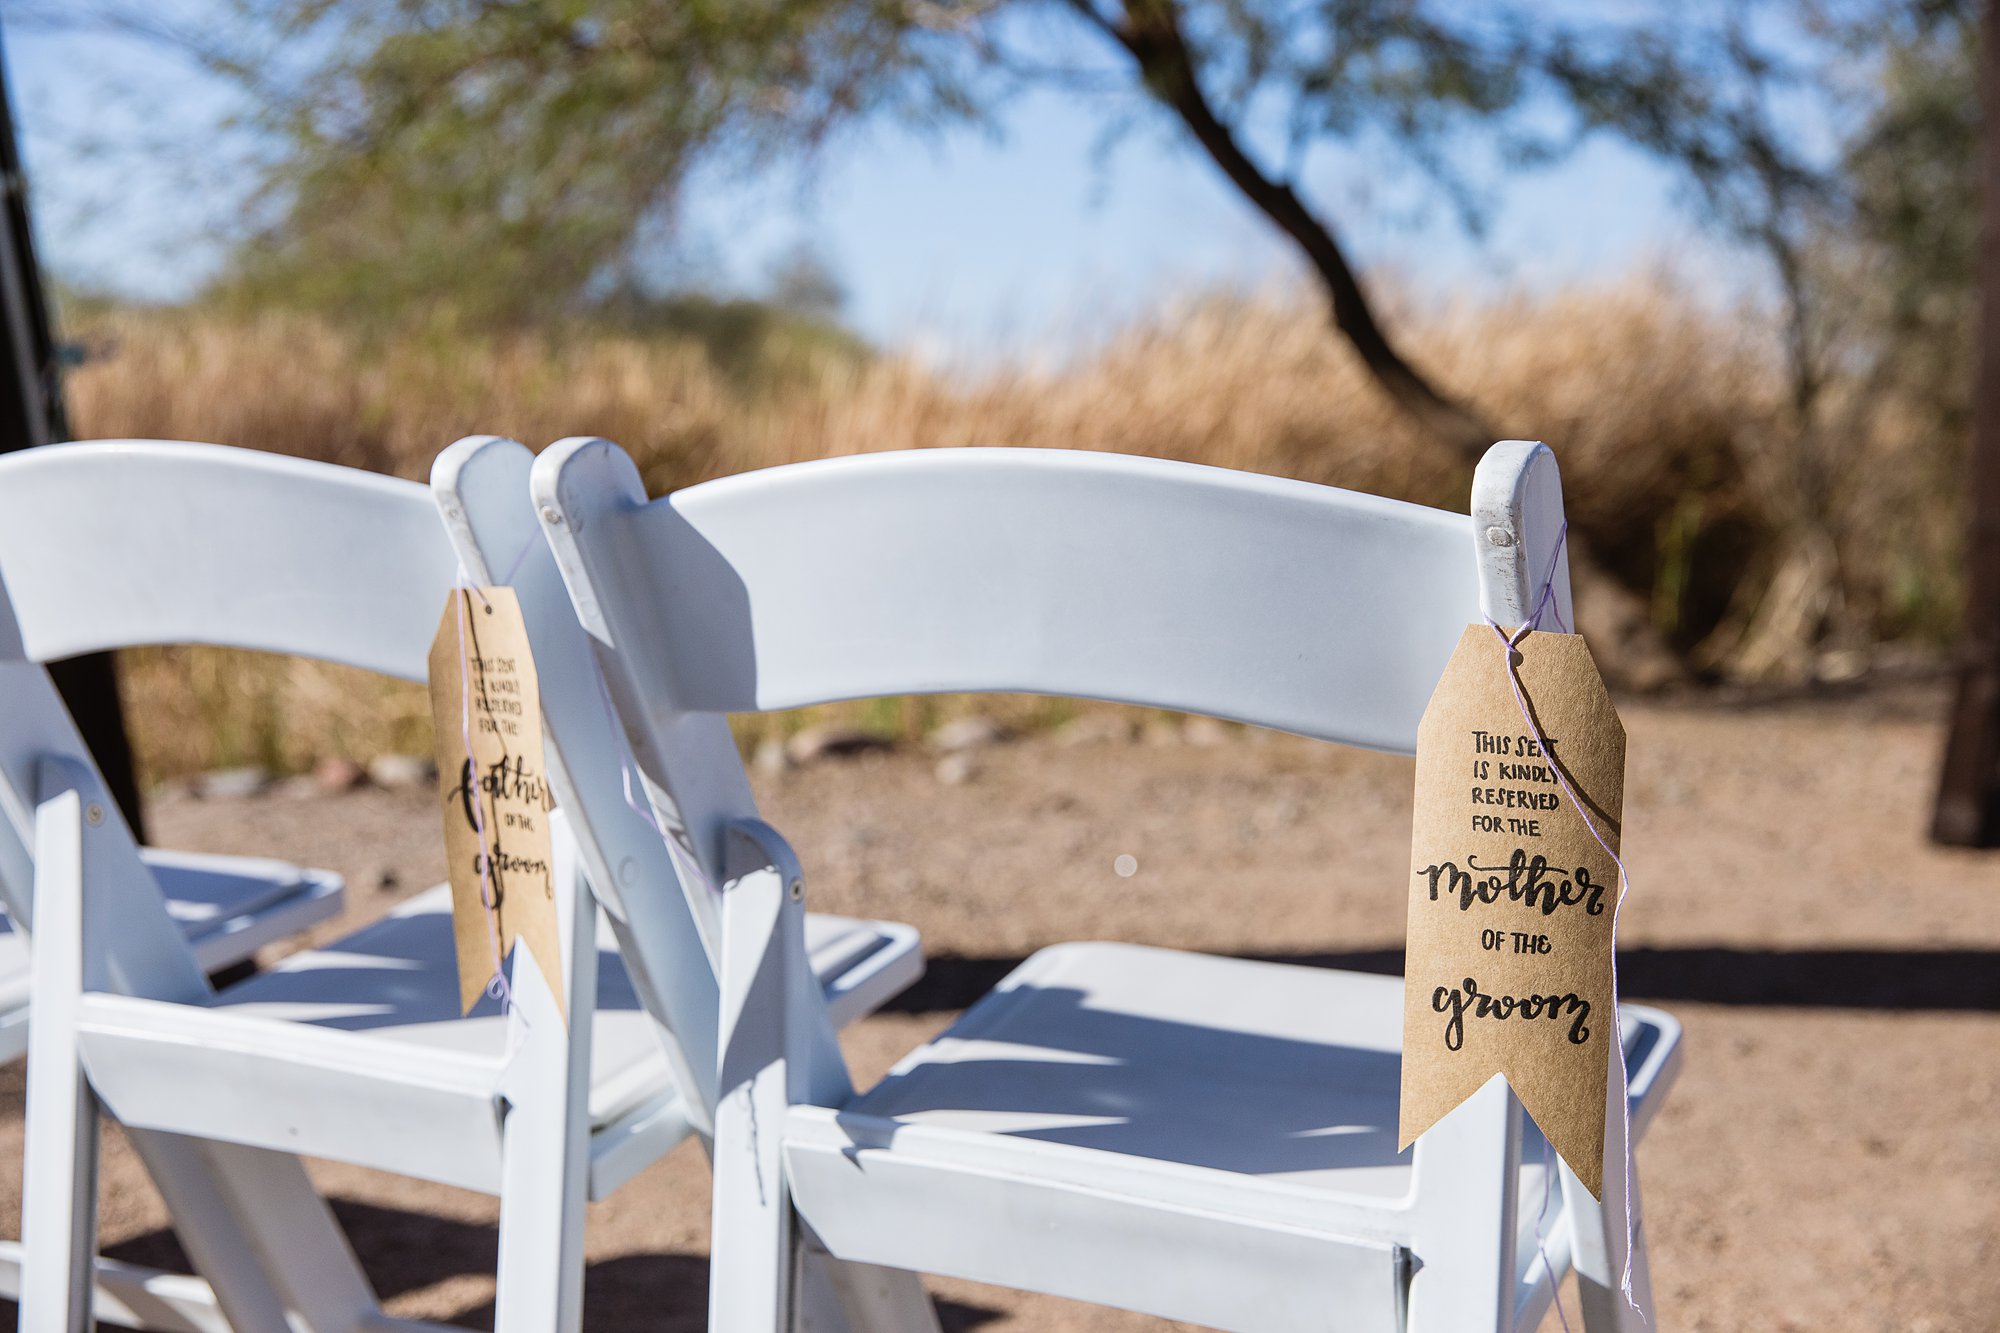 Kraft tags reserving seat for mother of the groom at a wedding ceremony.